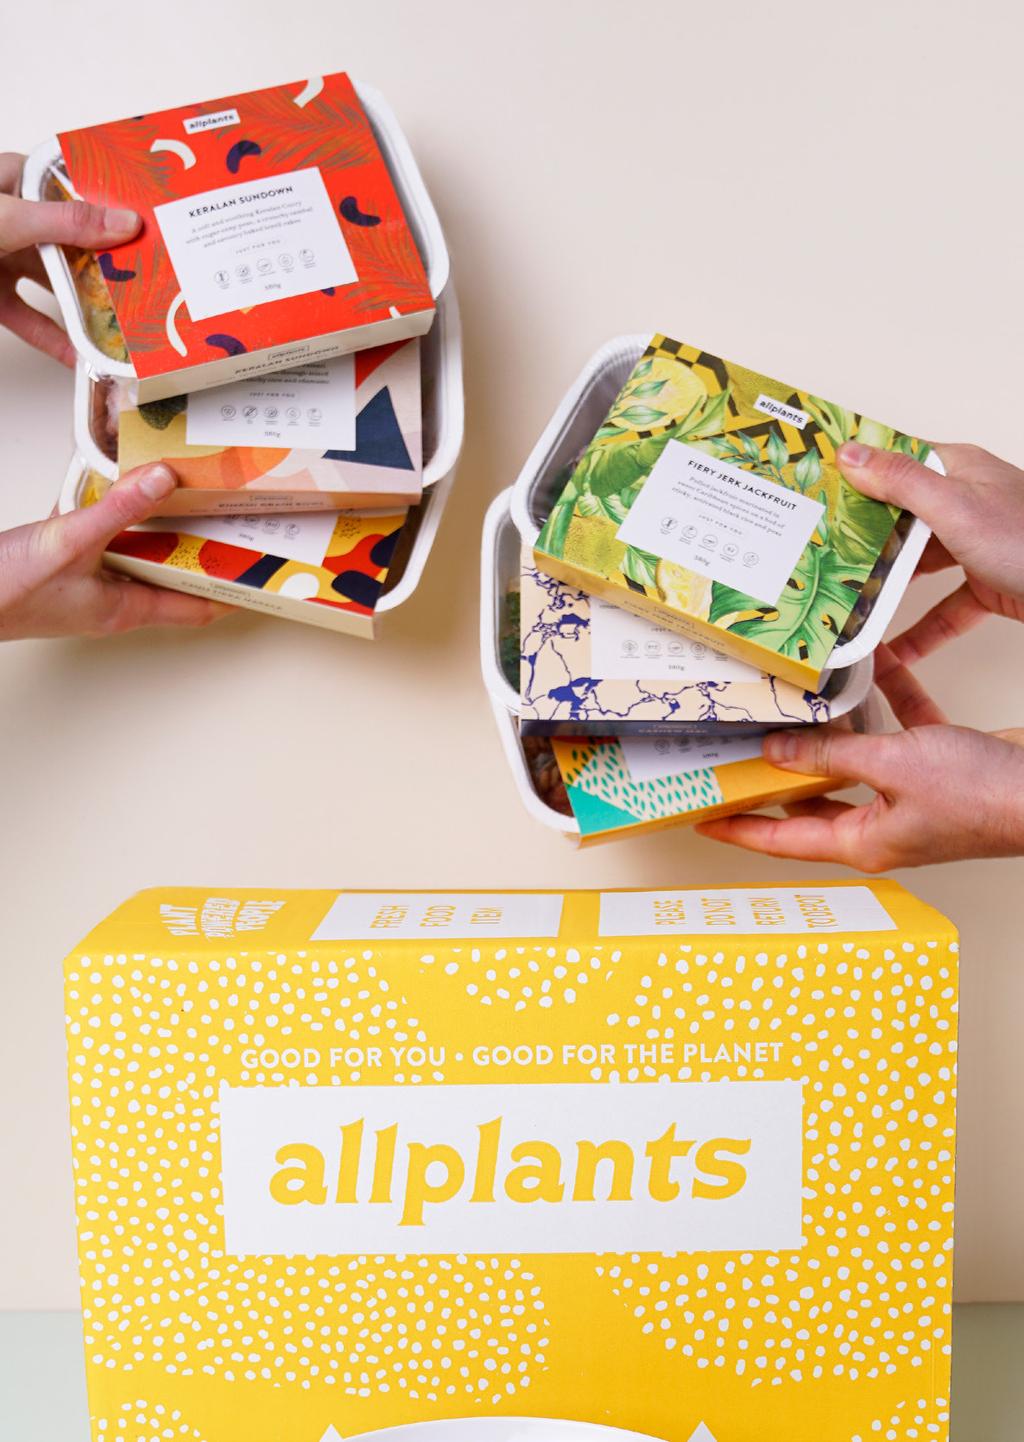 TELL YOUR FRIENDS Invite friends, family, colleagues and loved ones to allplants and both earn 10 off Step 1 Log in